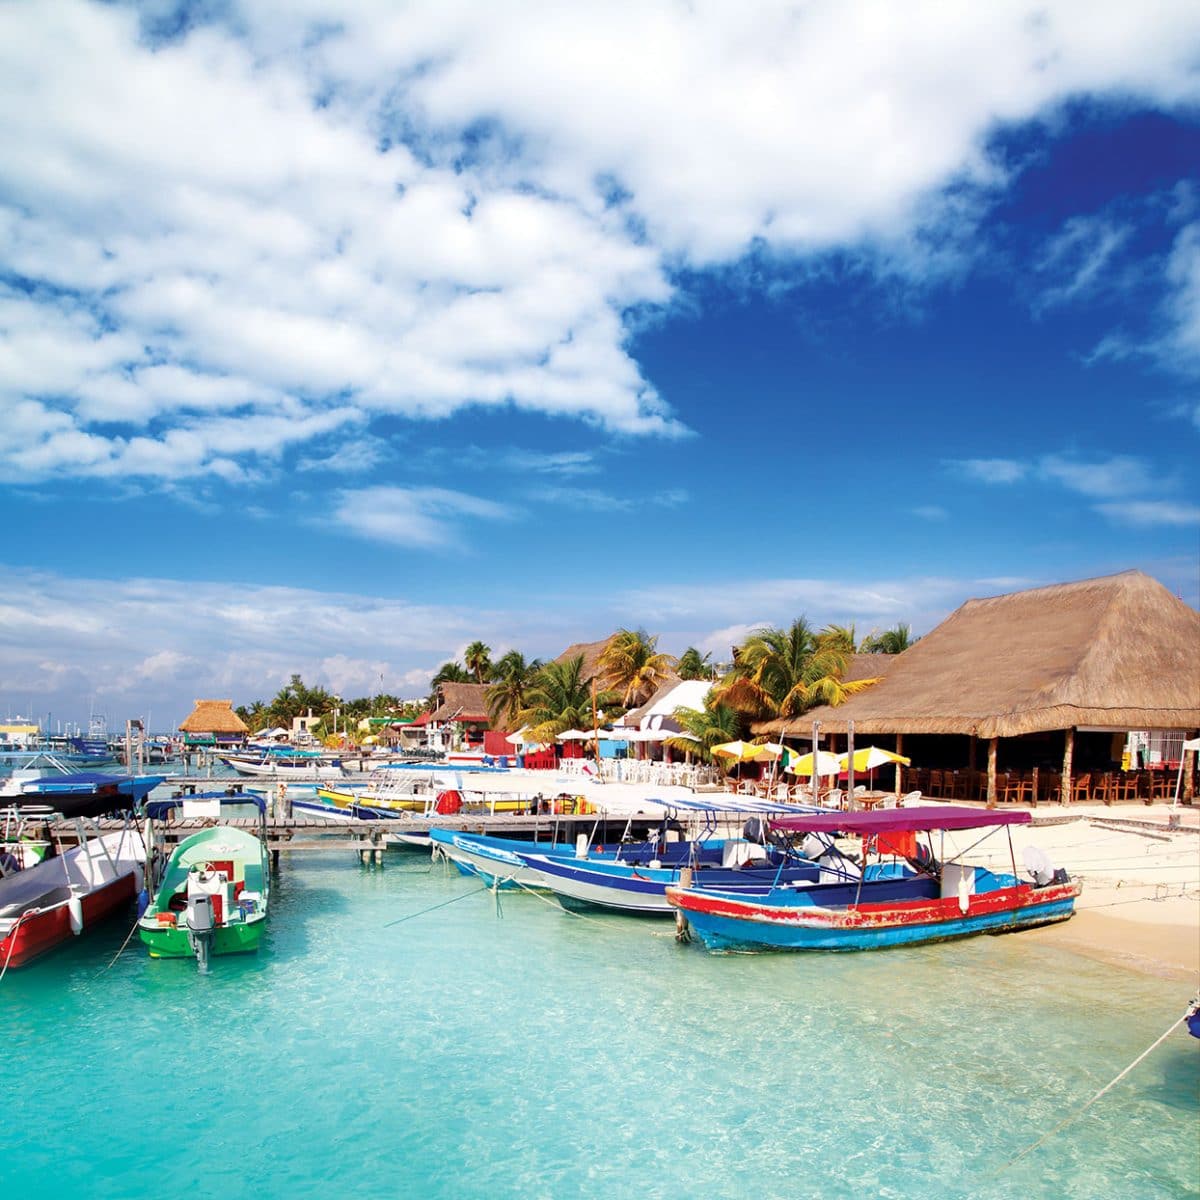 The island of Isla Mujeres, Mexico, is a great getaway excursion for a destination wedding